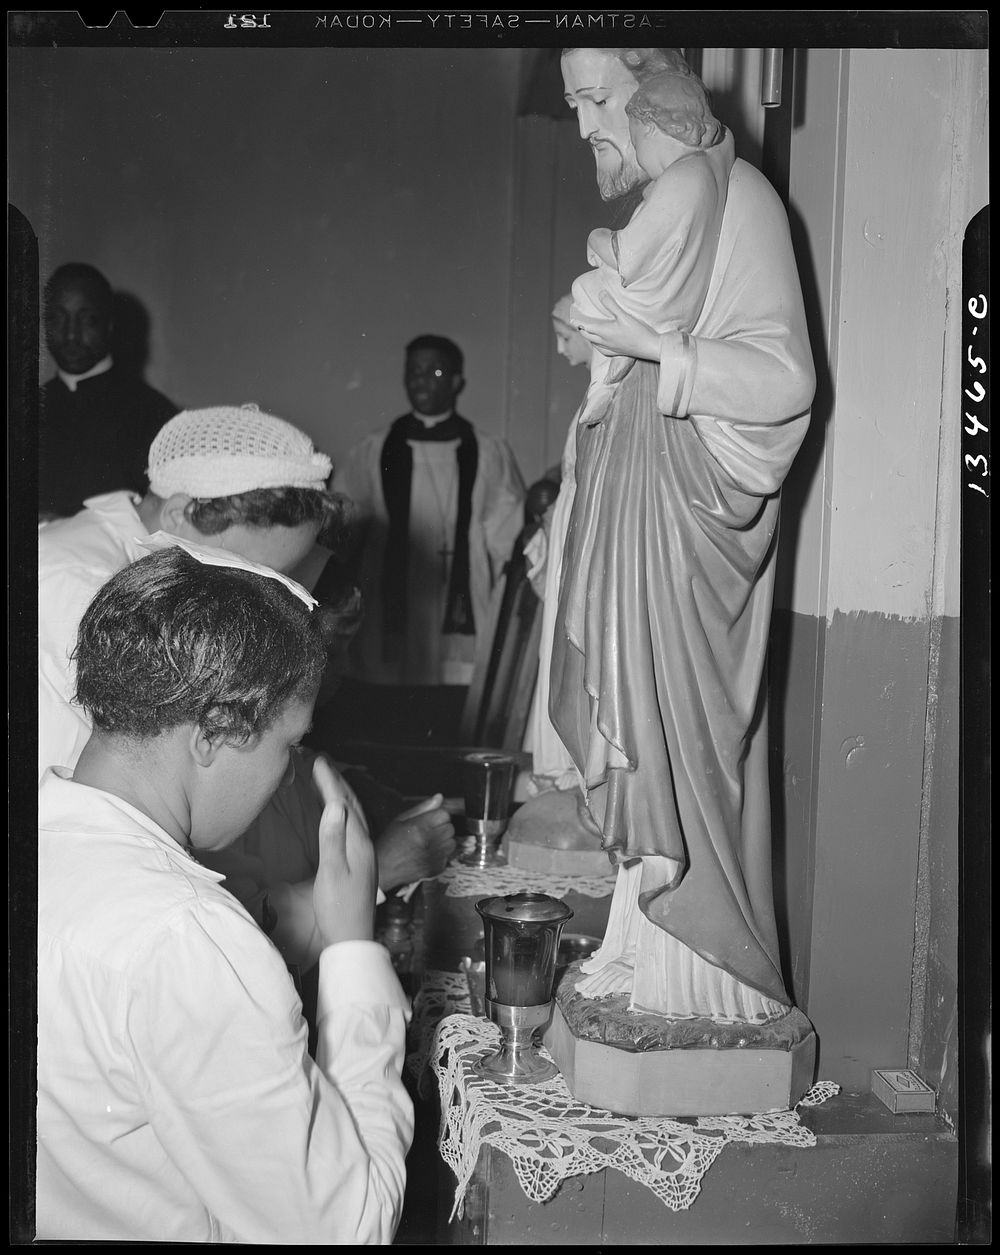 Washington, D.C. Worshippers before the altar in the St. Martin's Spiritual Church. Sourced from the Library of Congress.